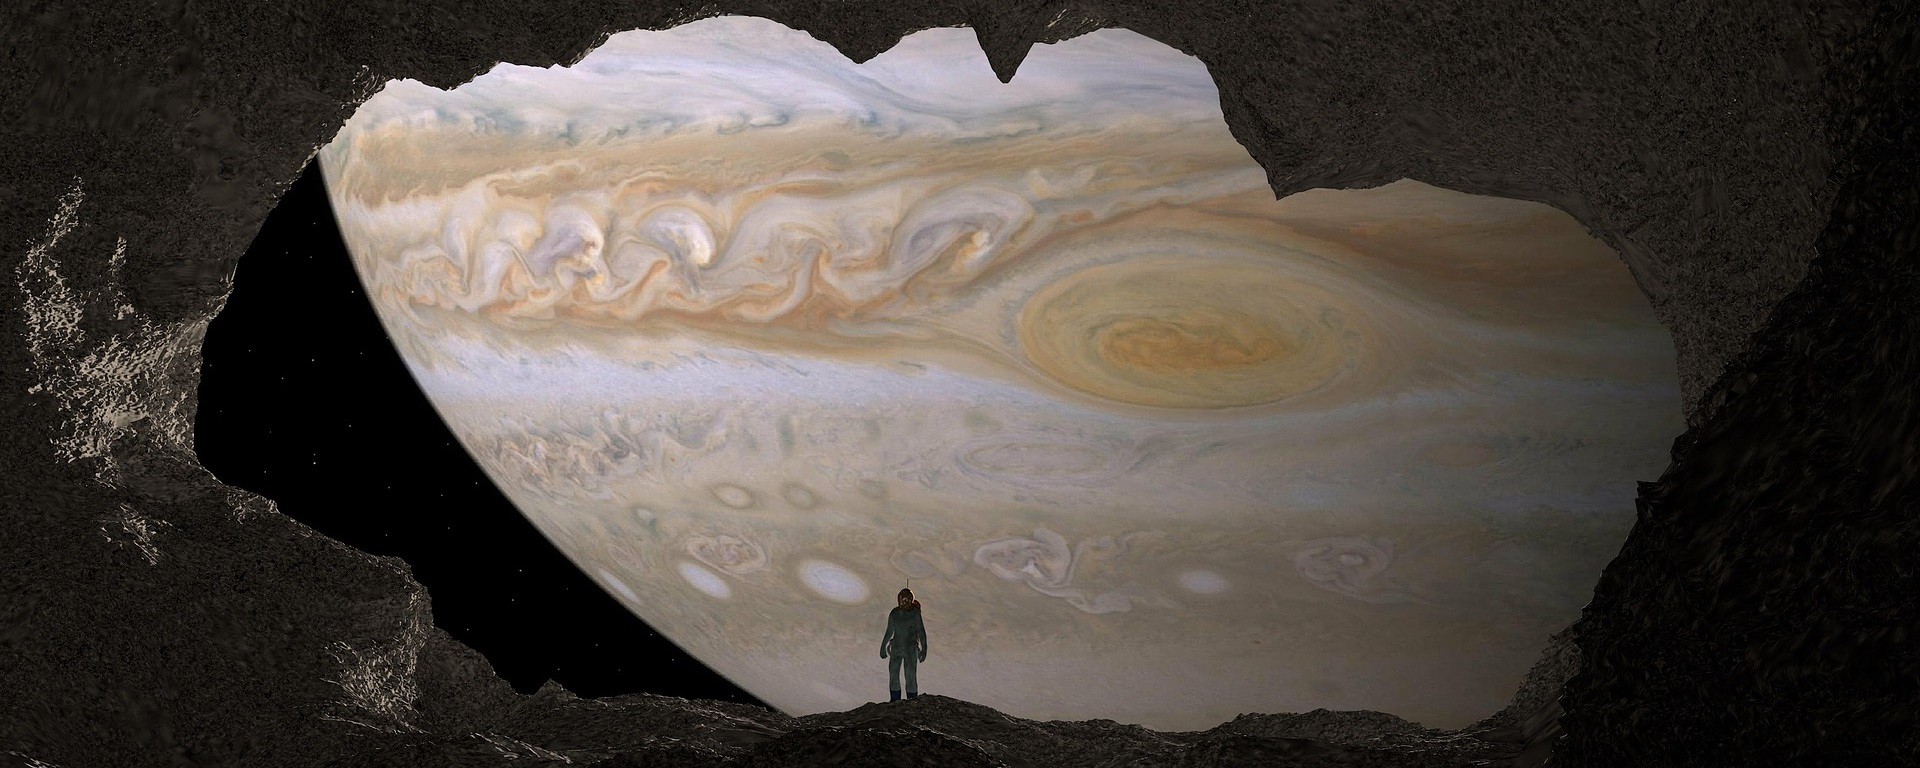 An astronaut stands on the surface of a moon of Jupiter, with the gas giant filling the sky in the horizon.